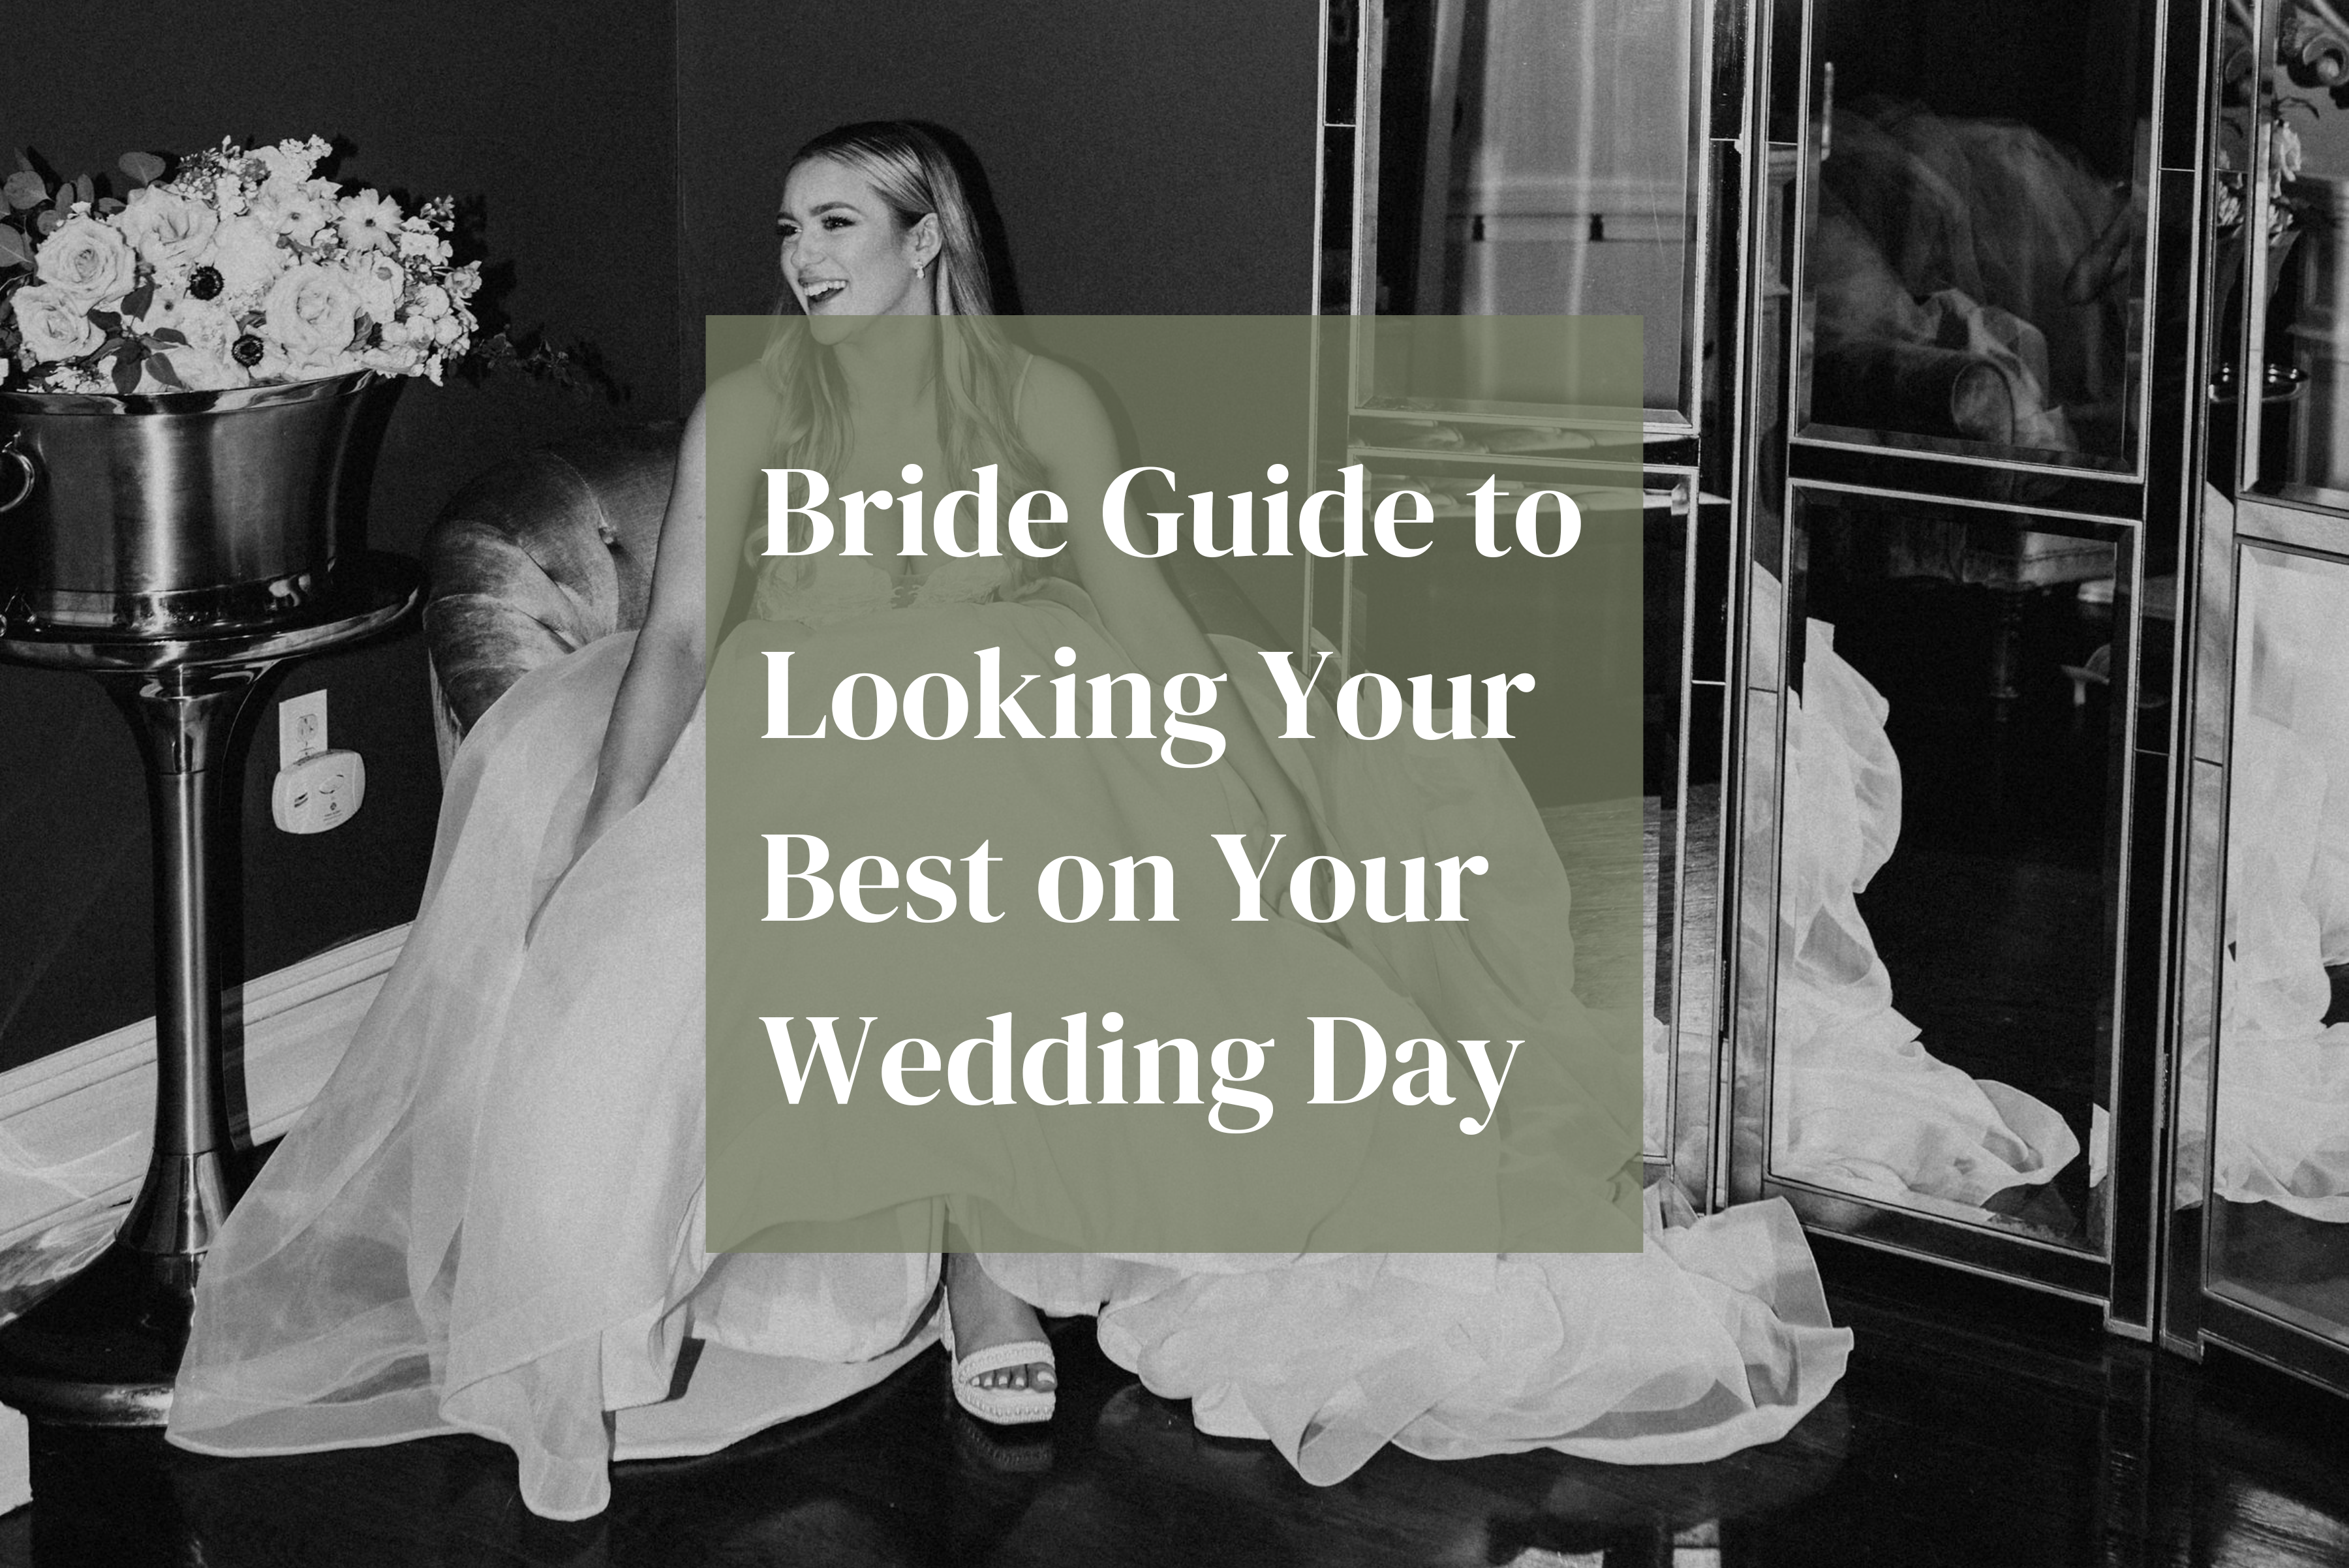 how to look your best on your wedding day as a bride